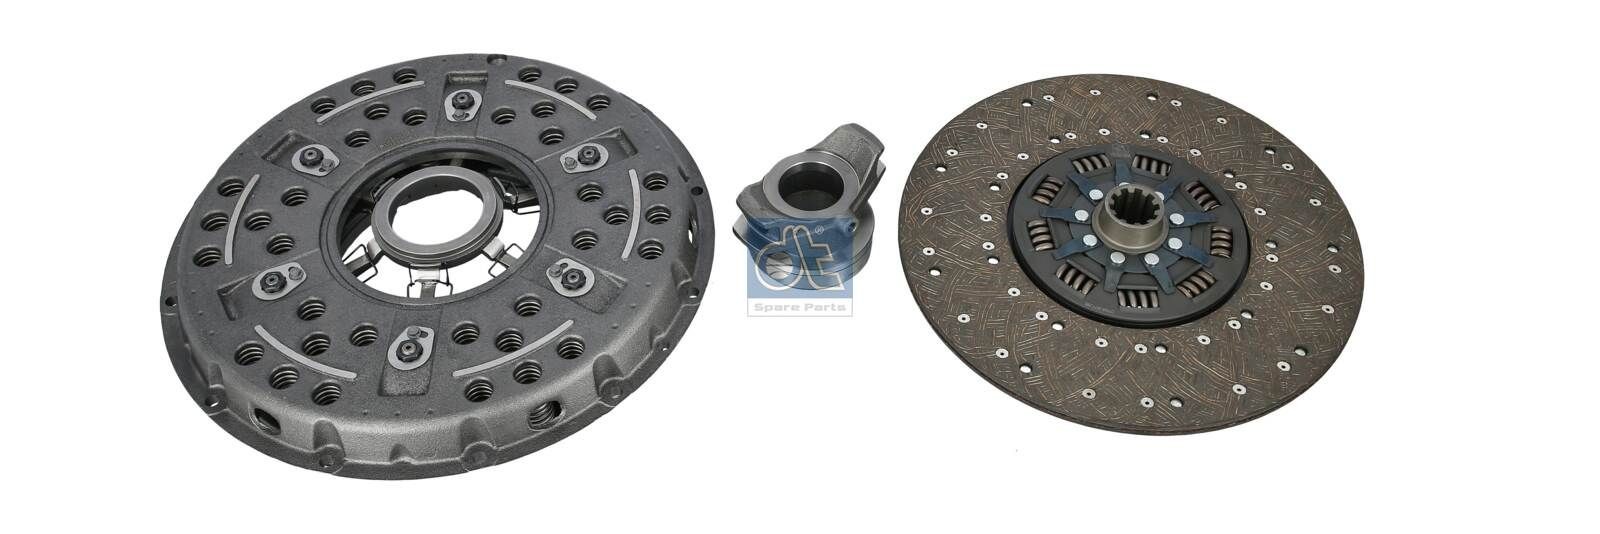 1800 107 133 DT Spare Parts 420mm Ø: 420mm Clutch replacement kit 2.93055 buy